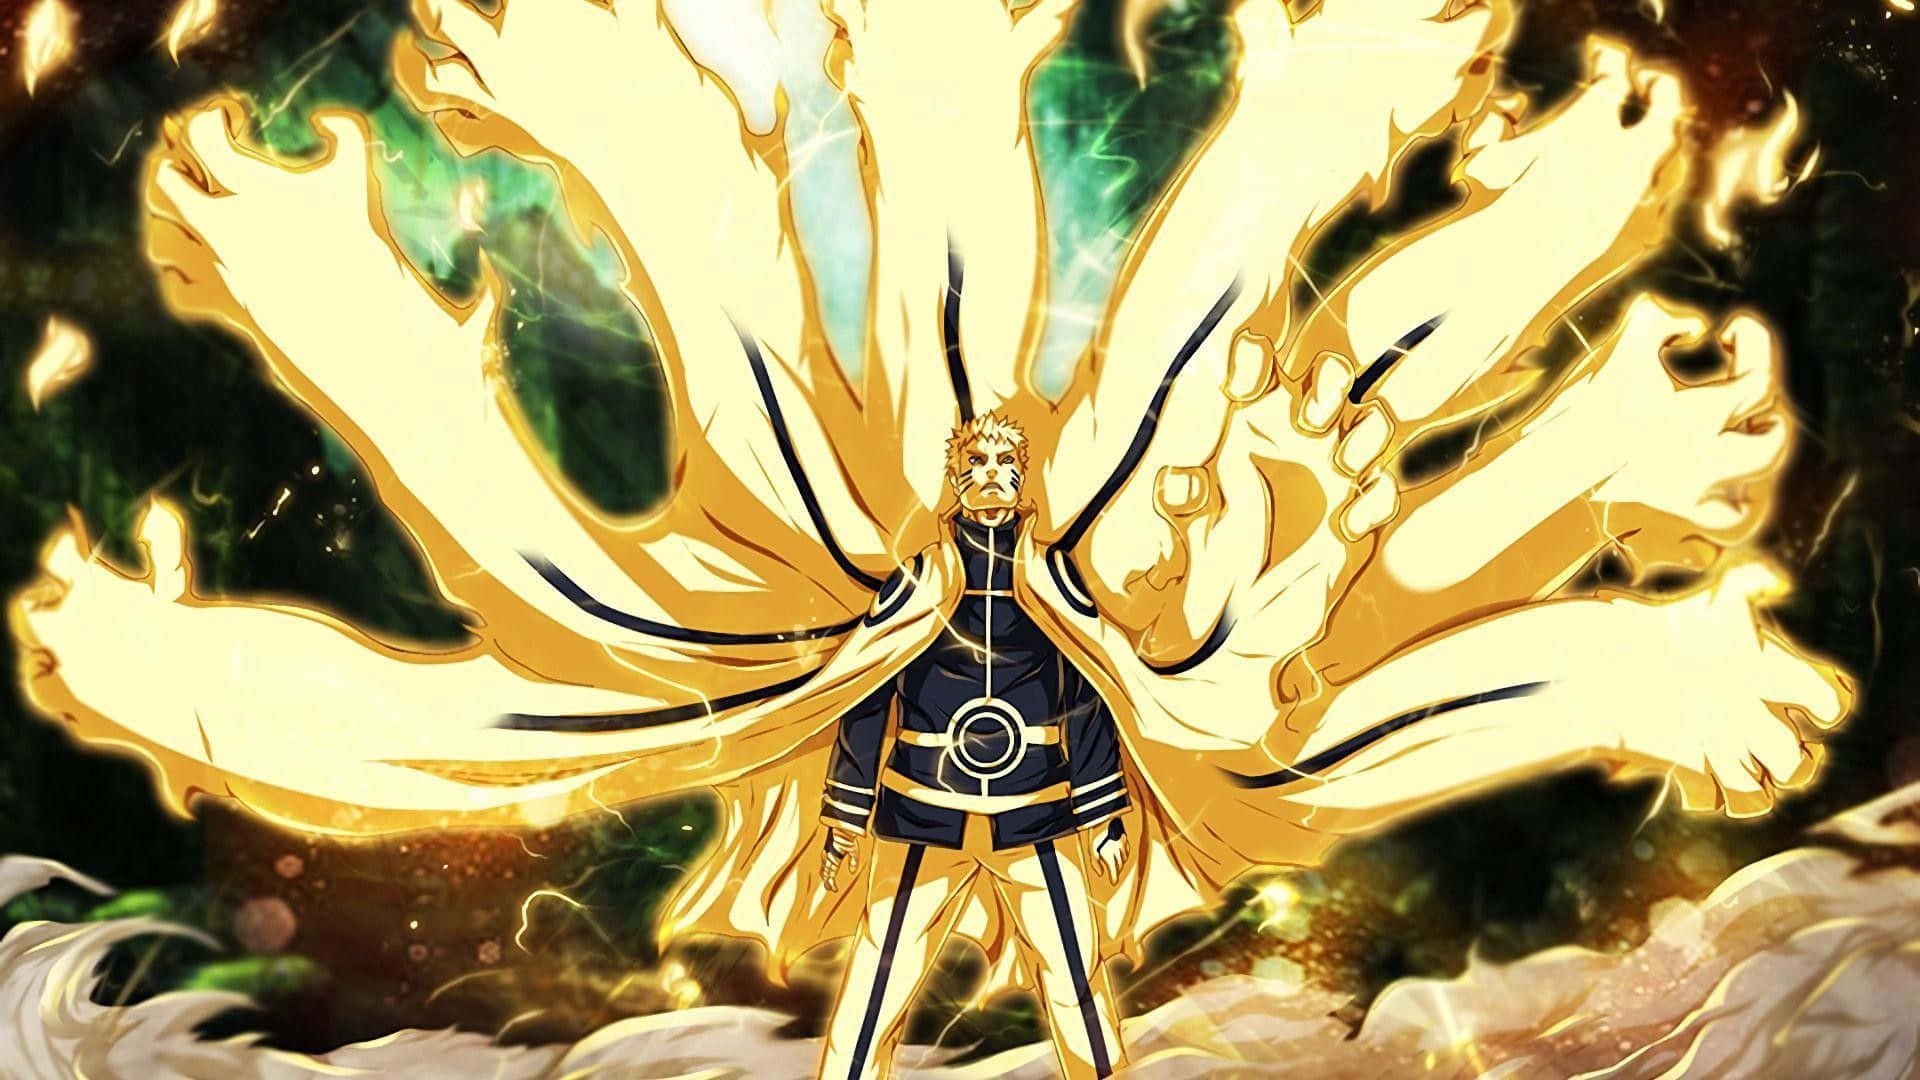 The legendary Sage of Six Paths wielding his divine powers Wallpaper